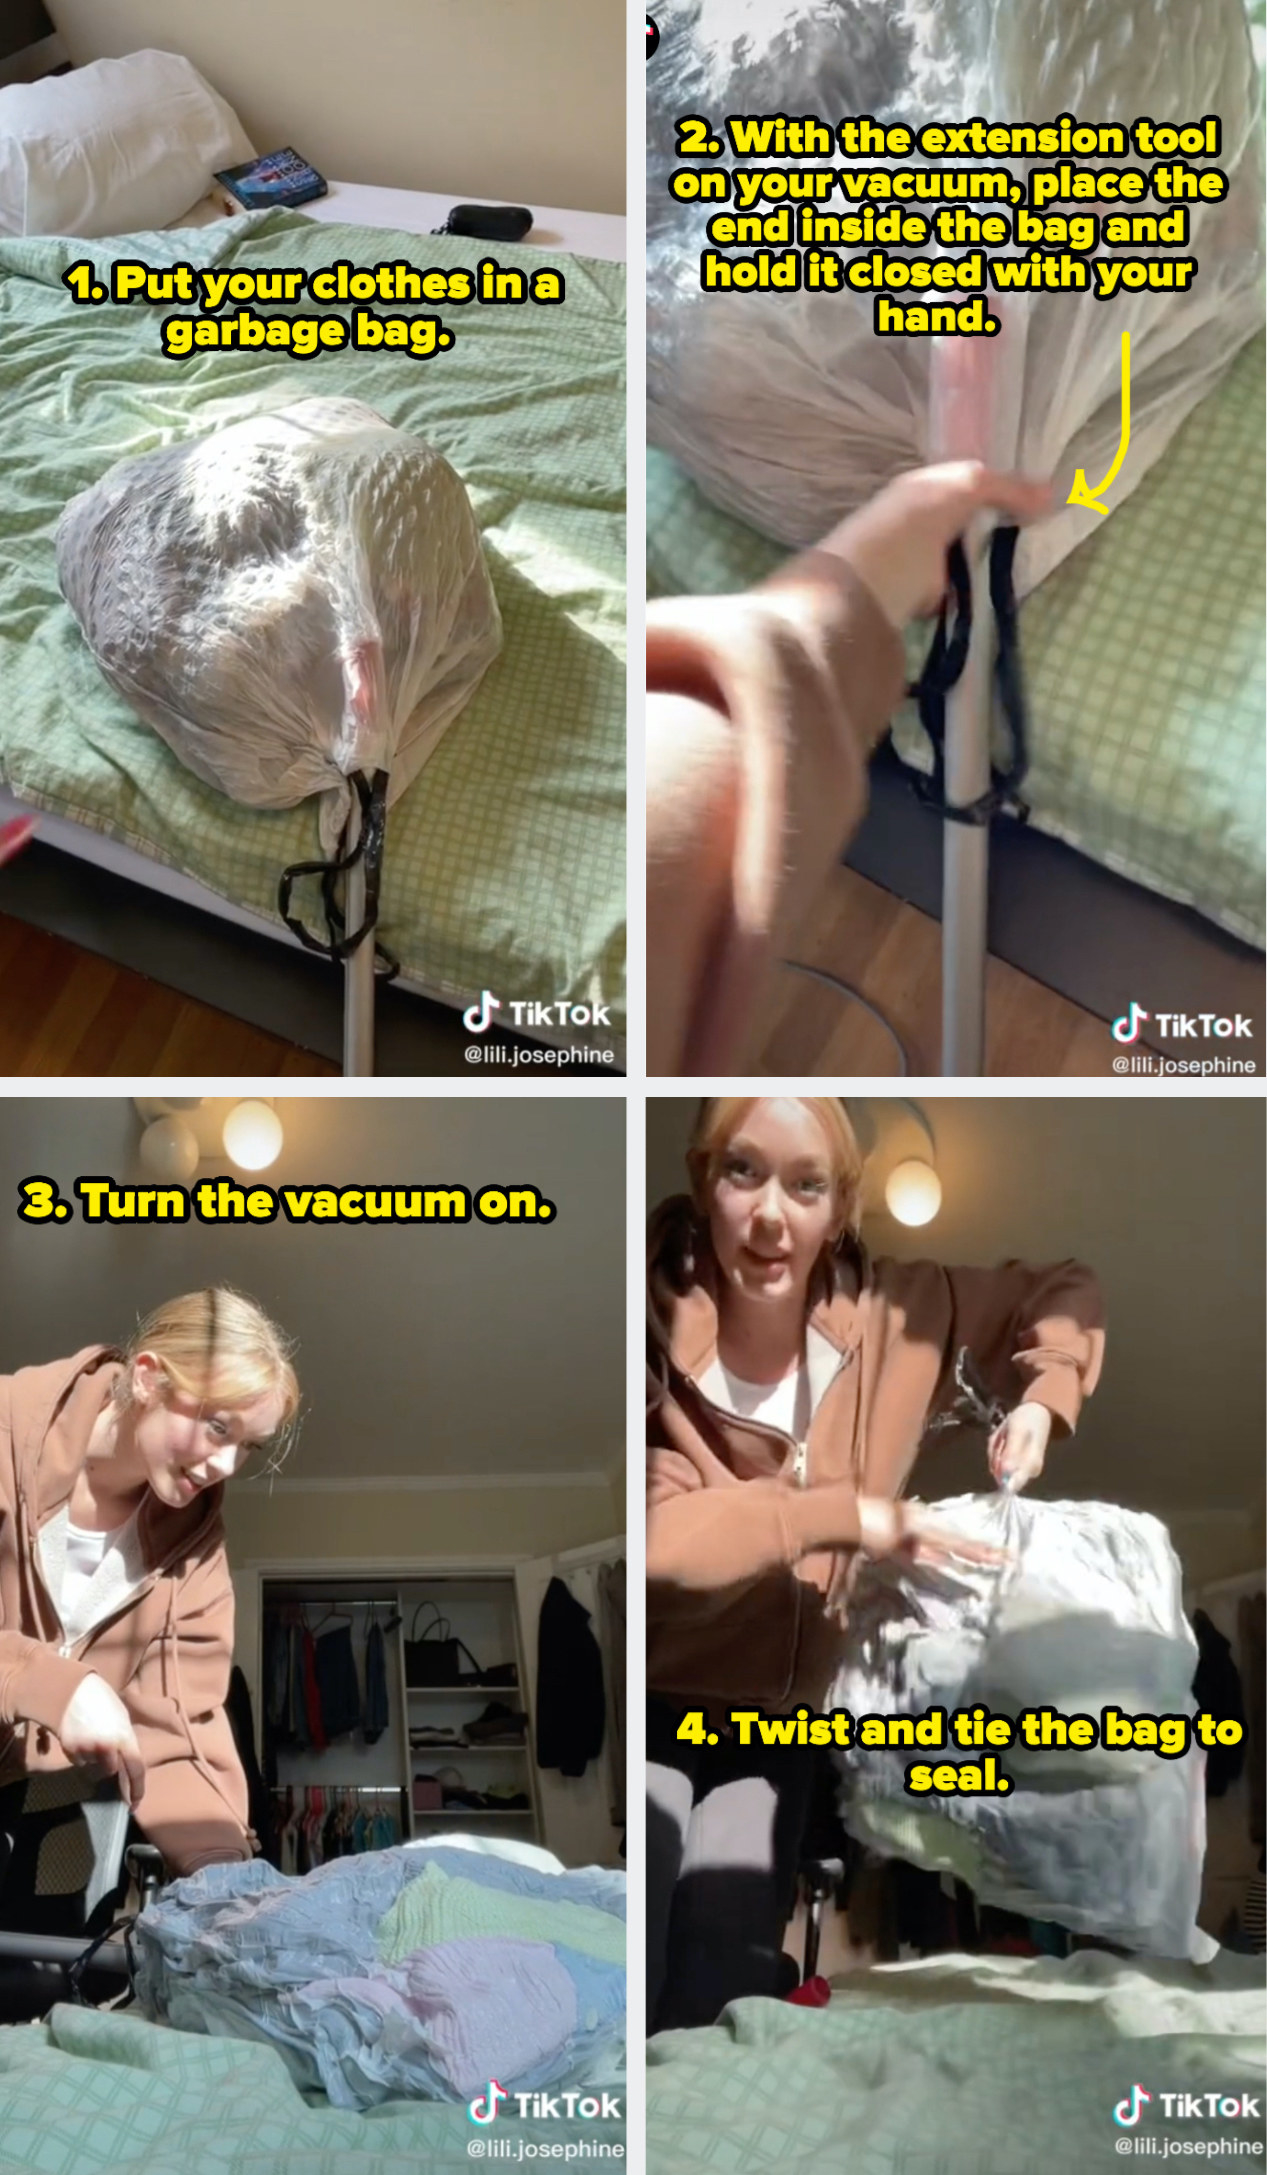 A guide to fill a garbage bag with clothes, then use the extension vacuum tool and place it in the bag, holding it closed over the tool. Turn the vacuum on to suck out the air, and twist and tie the bag to seal it